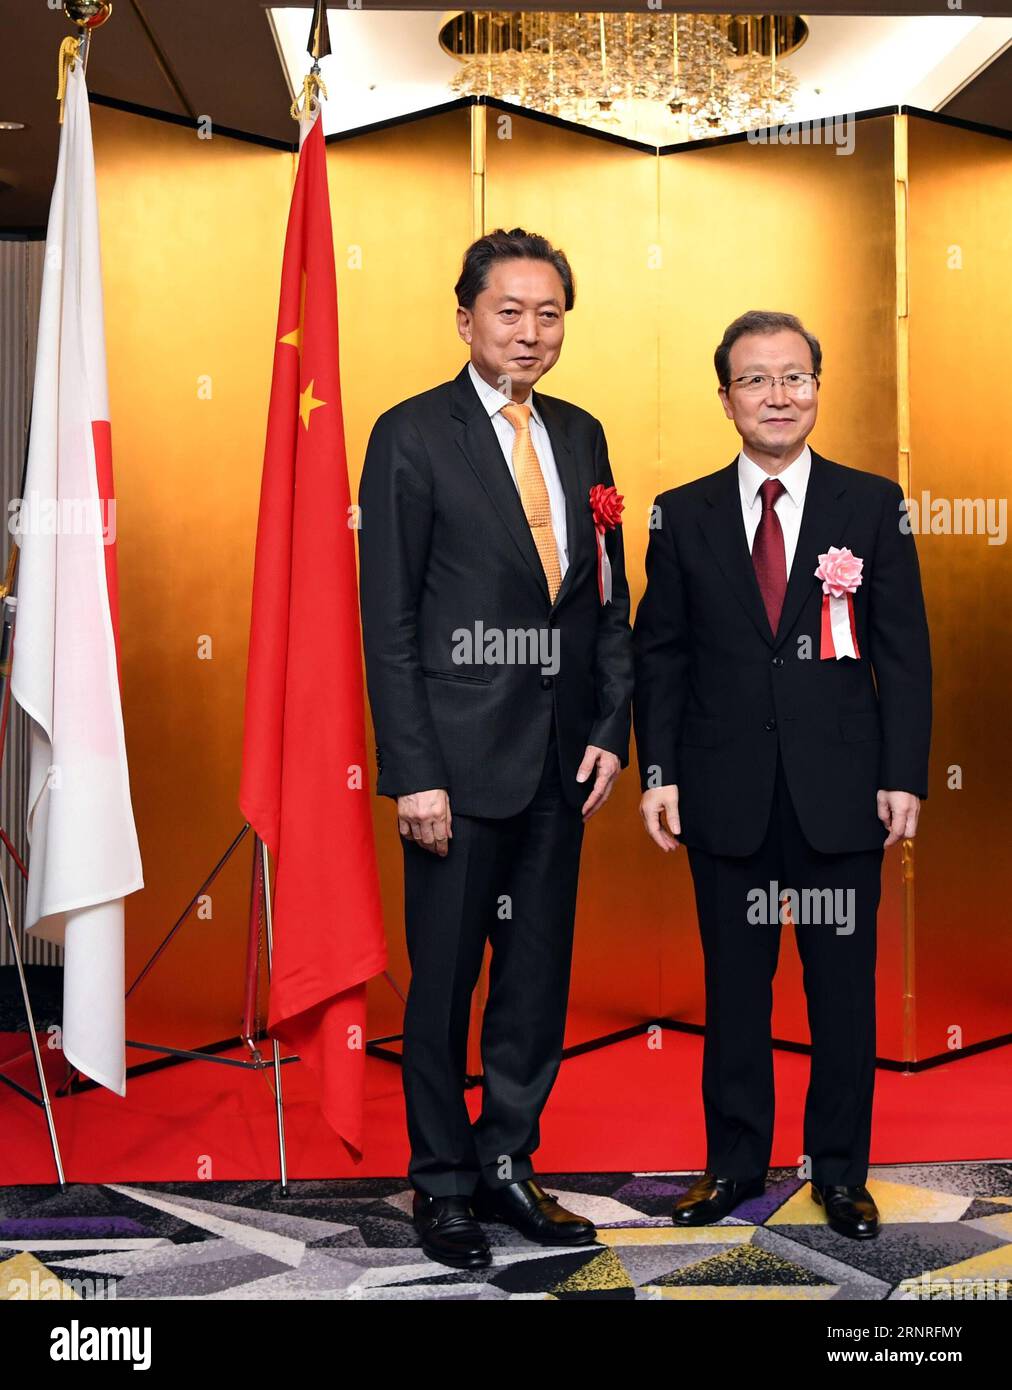 (170928) -- TOKYO, Sept. 28, 2017 -- Chinese Ambassador to Japan Cheng Yonghua (R) poses for photo with Yukio Hatoyama, former prime minister of Japan, at a ceremony marking China s upcoming National Day in Tokyo, Japan, Sept. 28, 2017. ) (zw) JAPAN-TOKYO-CHINA-NATIONAL DAY MaxPing PUBLICATIONxNOTxINxCHN Stock Photo